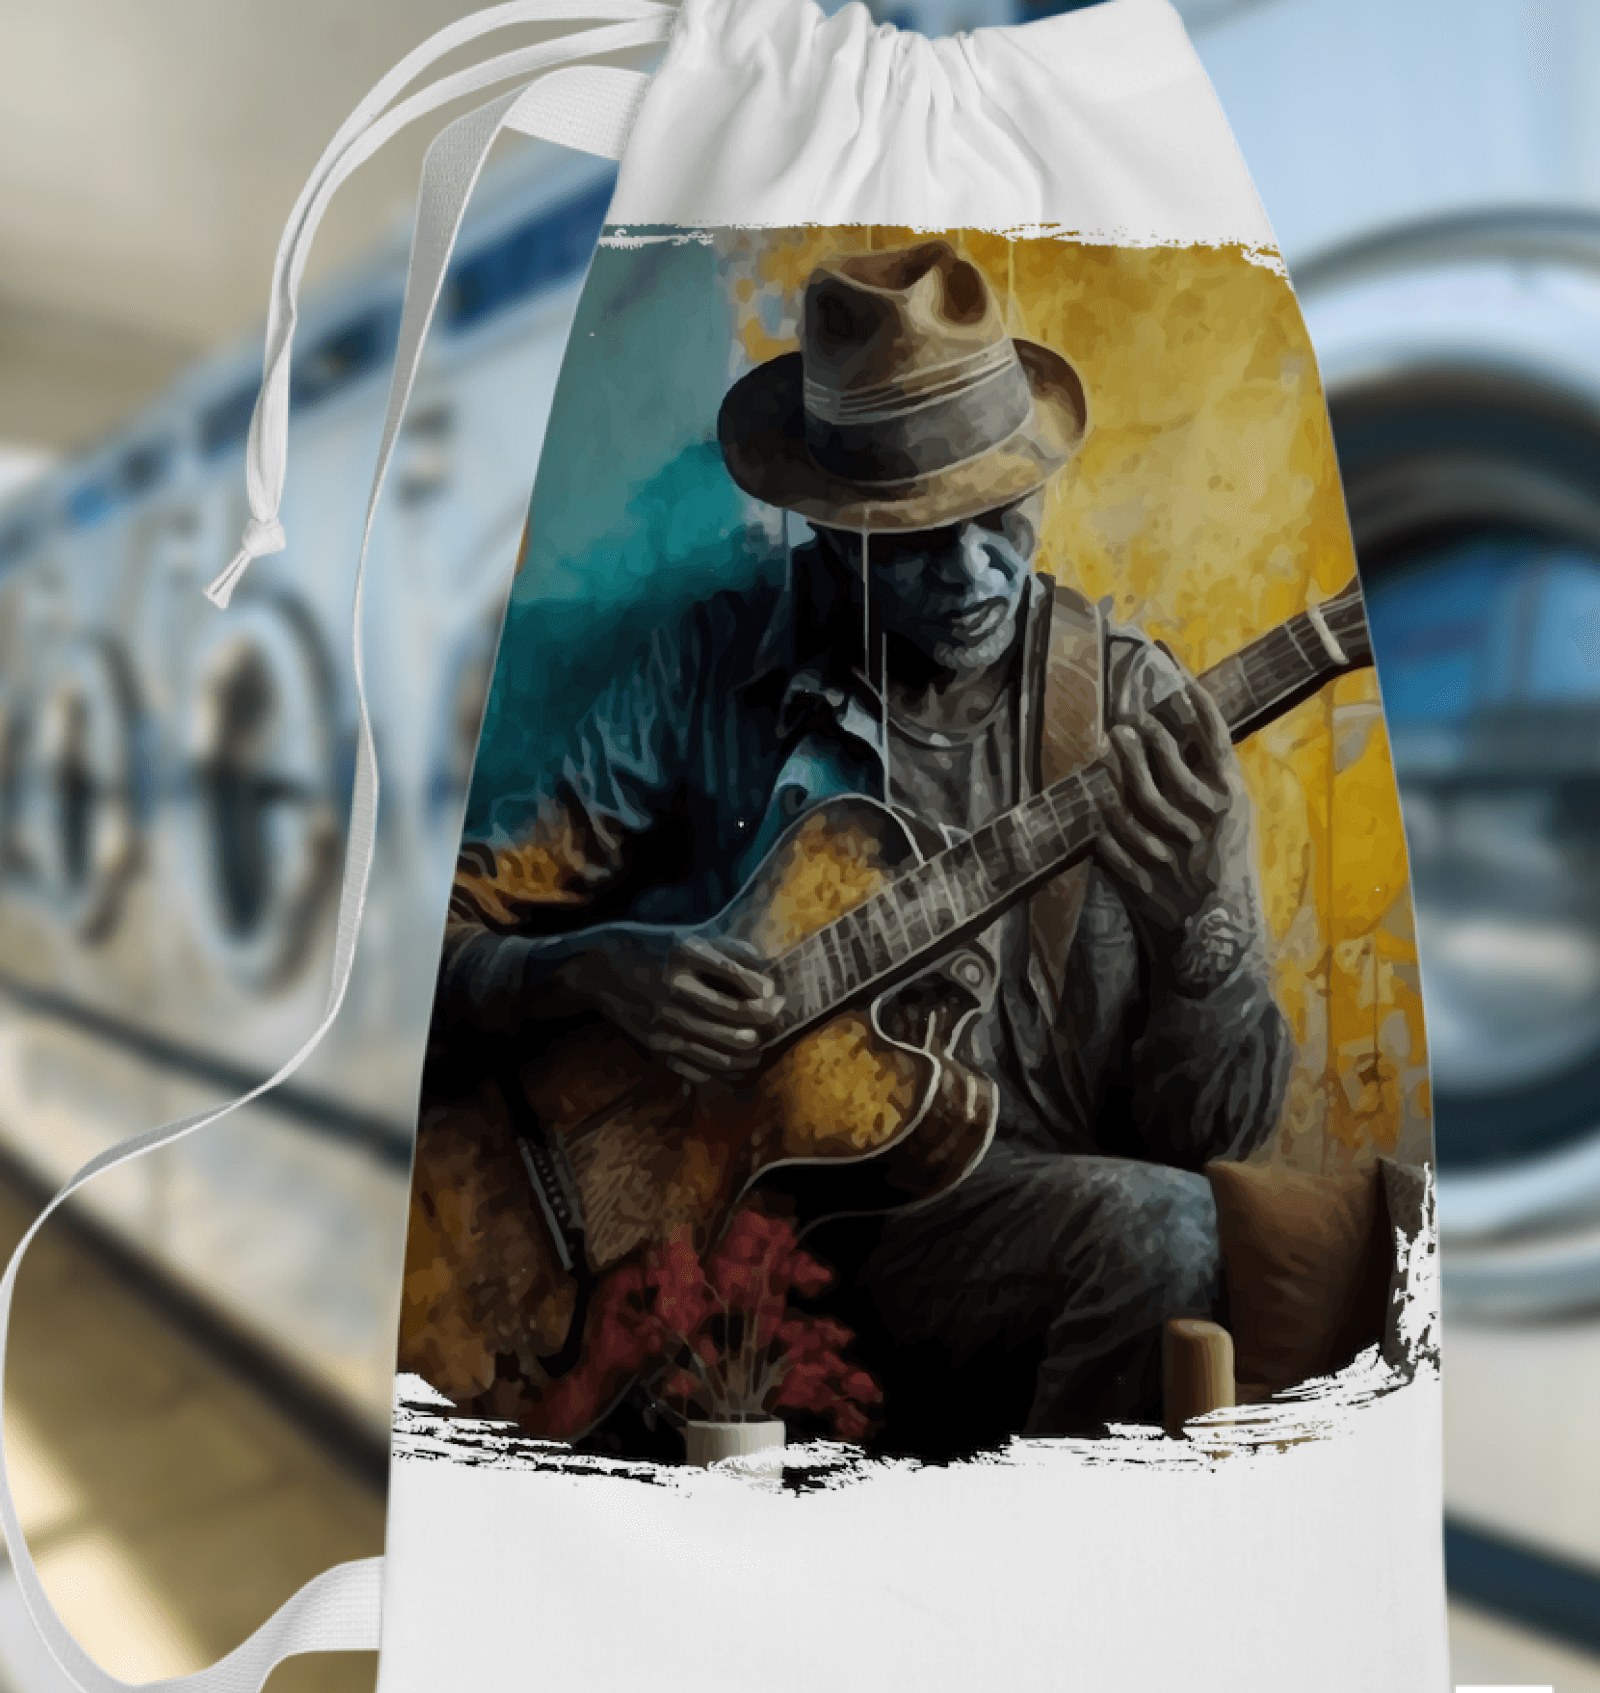 He's A Six String Wizard Laundry Bag - Beyond T-shirts